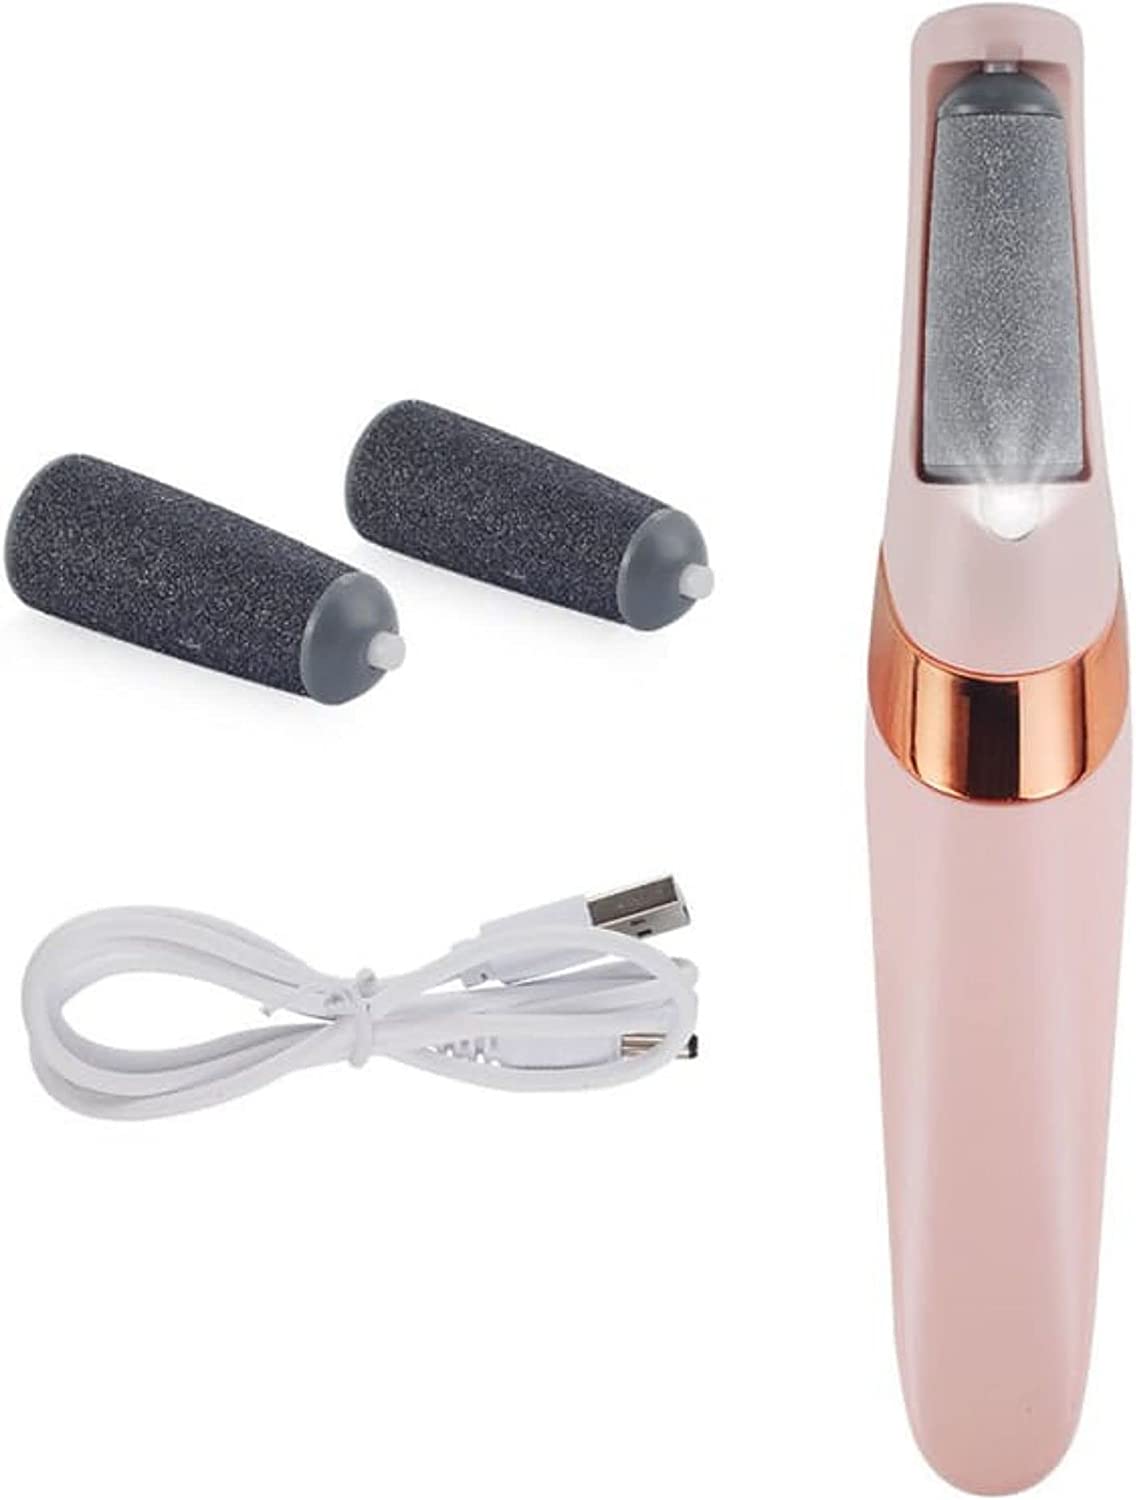 Smooth Pedicure Wand,Rechargeable Electric Callus Remover Tool for An At-Home Spa Pedicure Experience,Pedicure Tools, Pedicure Tools Kit, Removes Dry